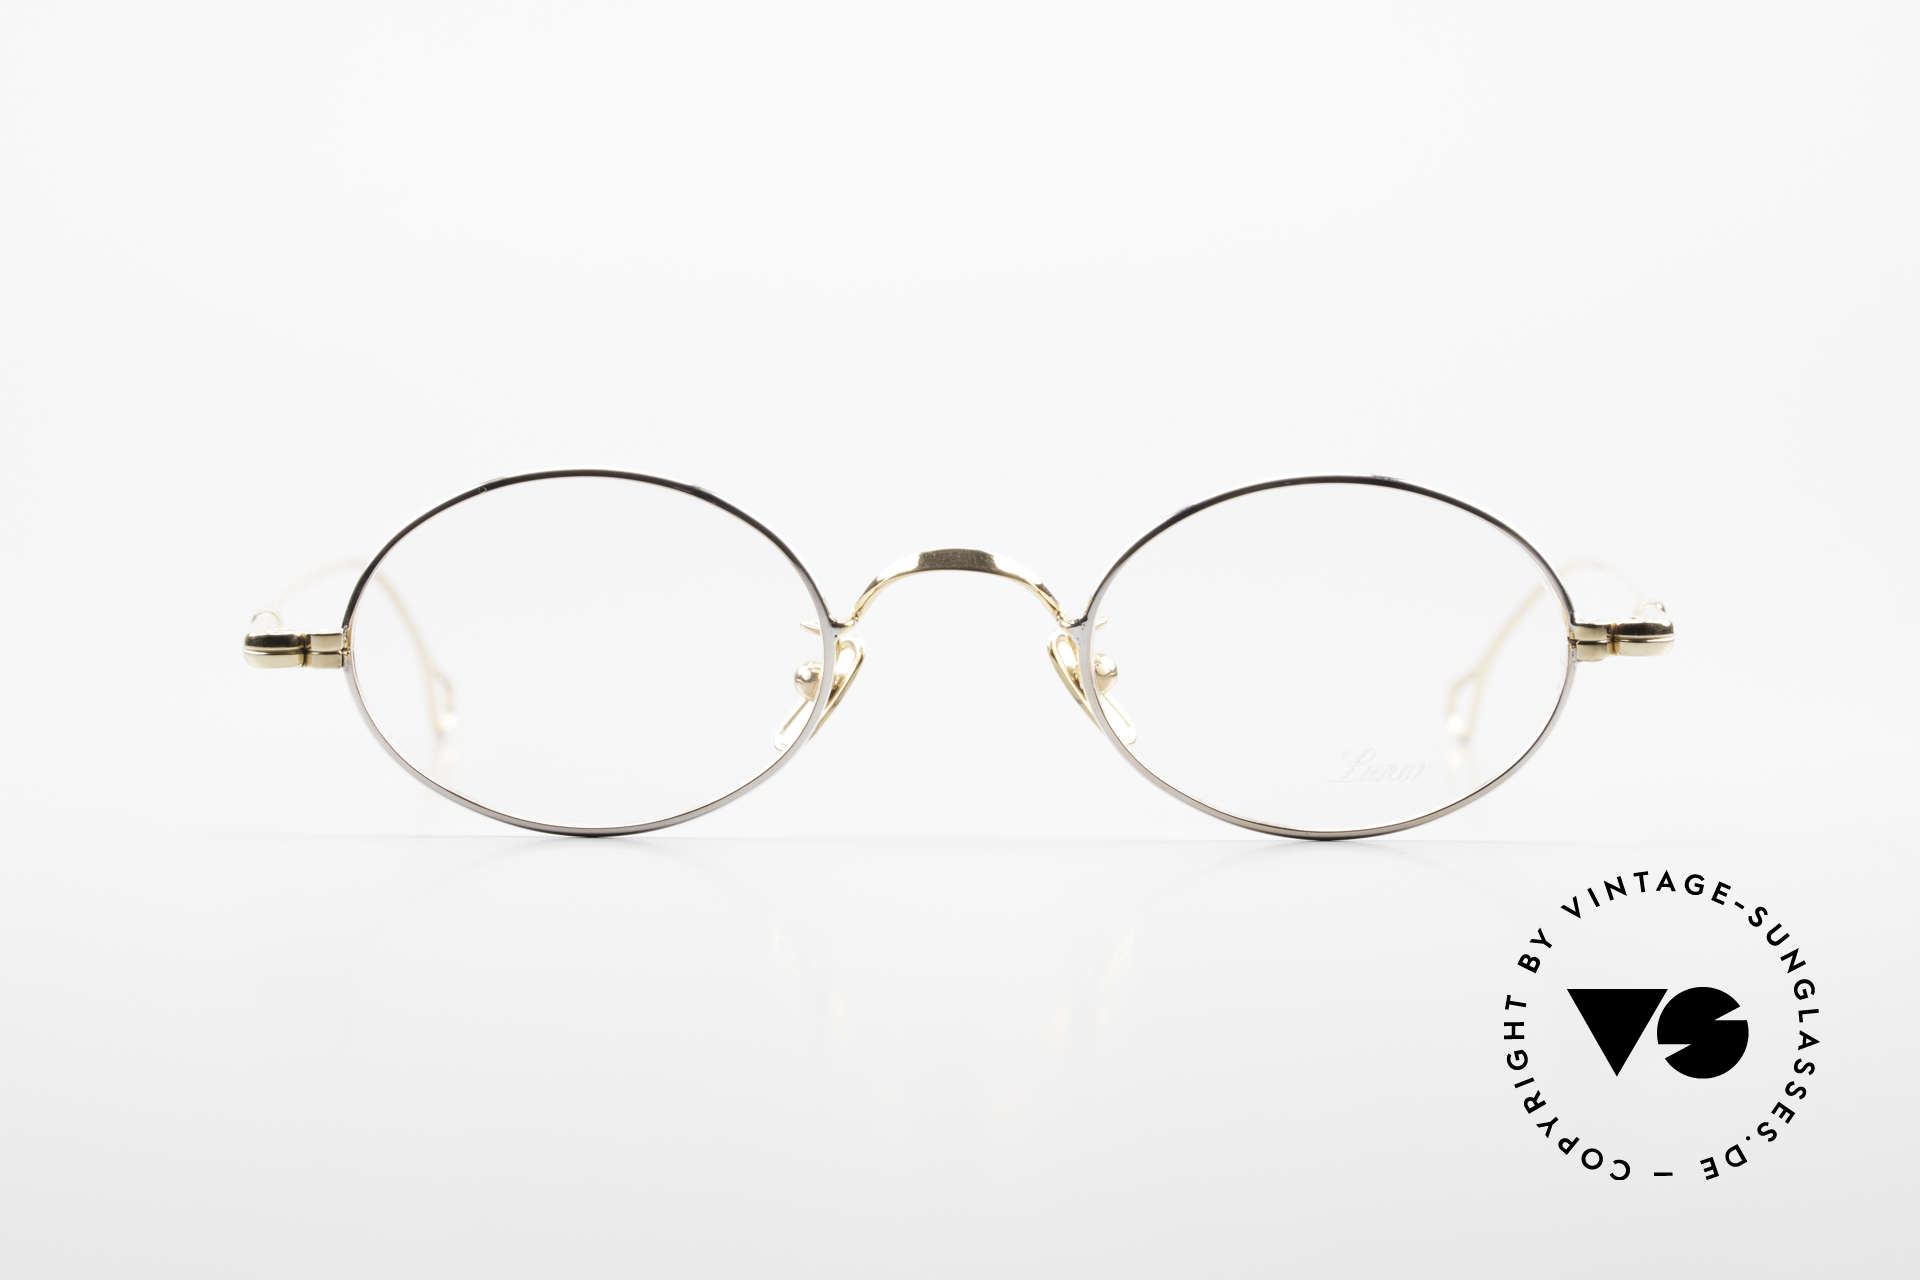 Lunor V 100 Oval Vintage Glasses Bicolor, without ostentatious logos (but in a timeless elegance), Made for Men and Women